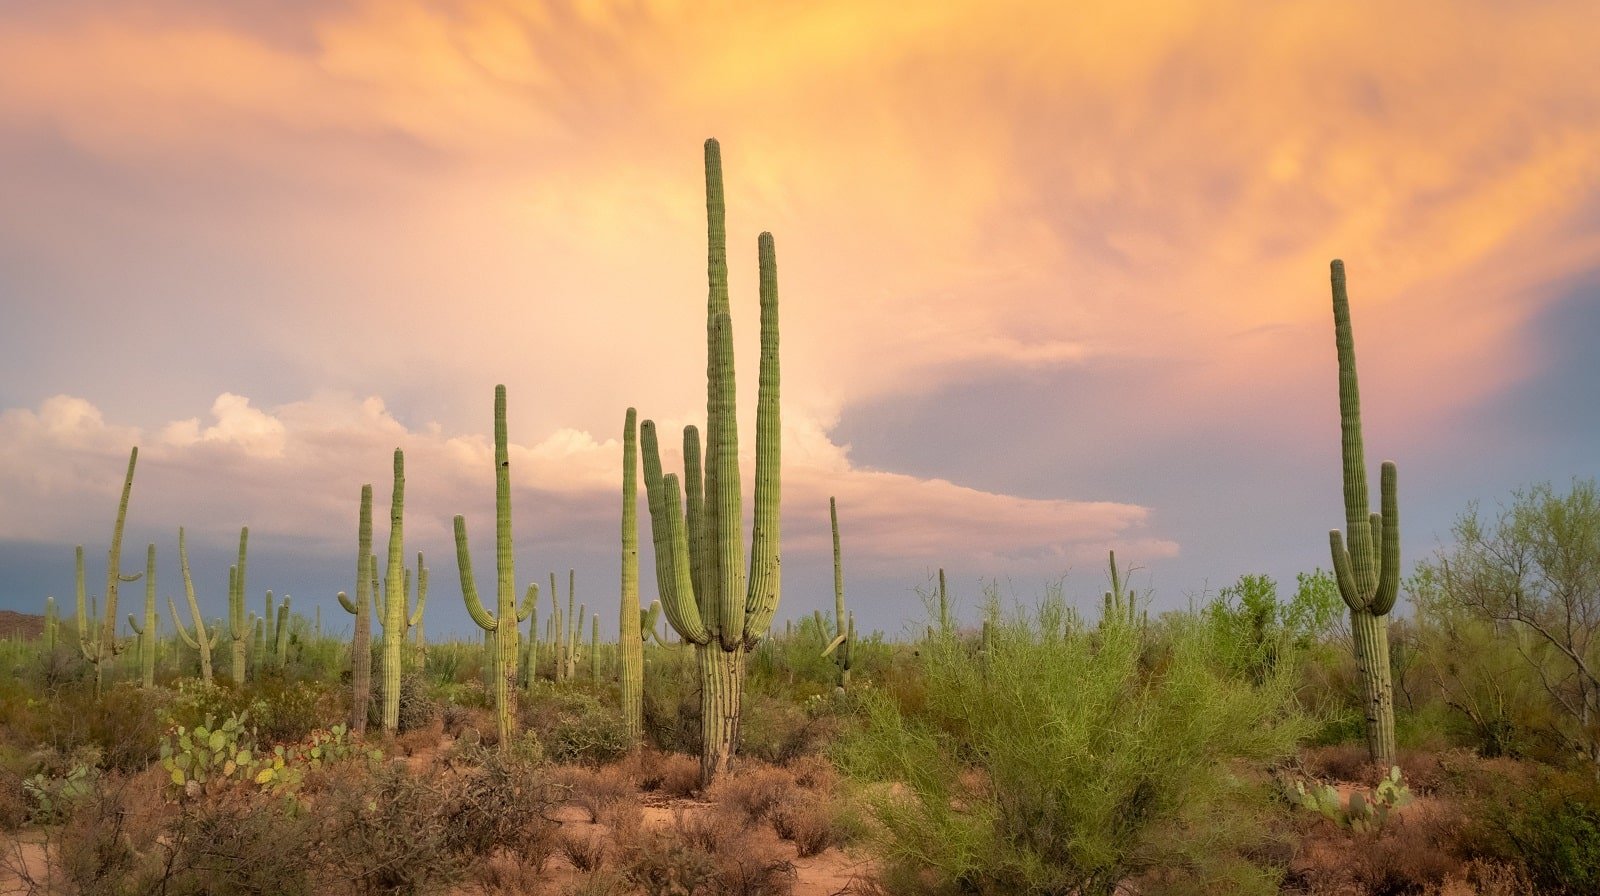 <p><span>The Sonoran Desert in Arizona presents a unique eco-friendly travel experience, showcasing the beauty and resilience of desert ecosystems. This region, characterized by its iconic saguaro cacti and diverse wildlife, offers a window into the adaptations necessary for life in an arid environment.</span></p> <p><span>Visiting conservation areas like the Saguaro National Park, you can explore the desert landscape through guided walks and educational programs. The region’s commitment to preserving its natural and cultural heritage is evident in its numerous conservation initiatives and the emphasis on sustainable tourism practices.</span></p> <p><b>Insider’s Tip: </b><span>Visit the Arizona-Sonora Desert Museum for an in-depth look at the desert’s ecology and conservation. </span></p> <p><b>How to Get There: </b><span>Fly into Tucson International Airport or Phoenix Sky Harbor International Airport. </span></p> <p><b>When to Travel: </b><span>Late fall to early spring for cooler temperatures and comfortable exploration.</span></p>